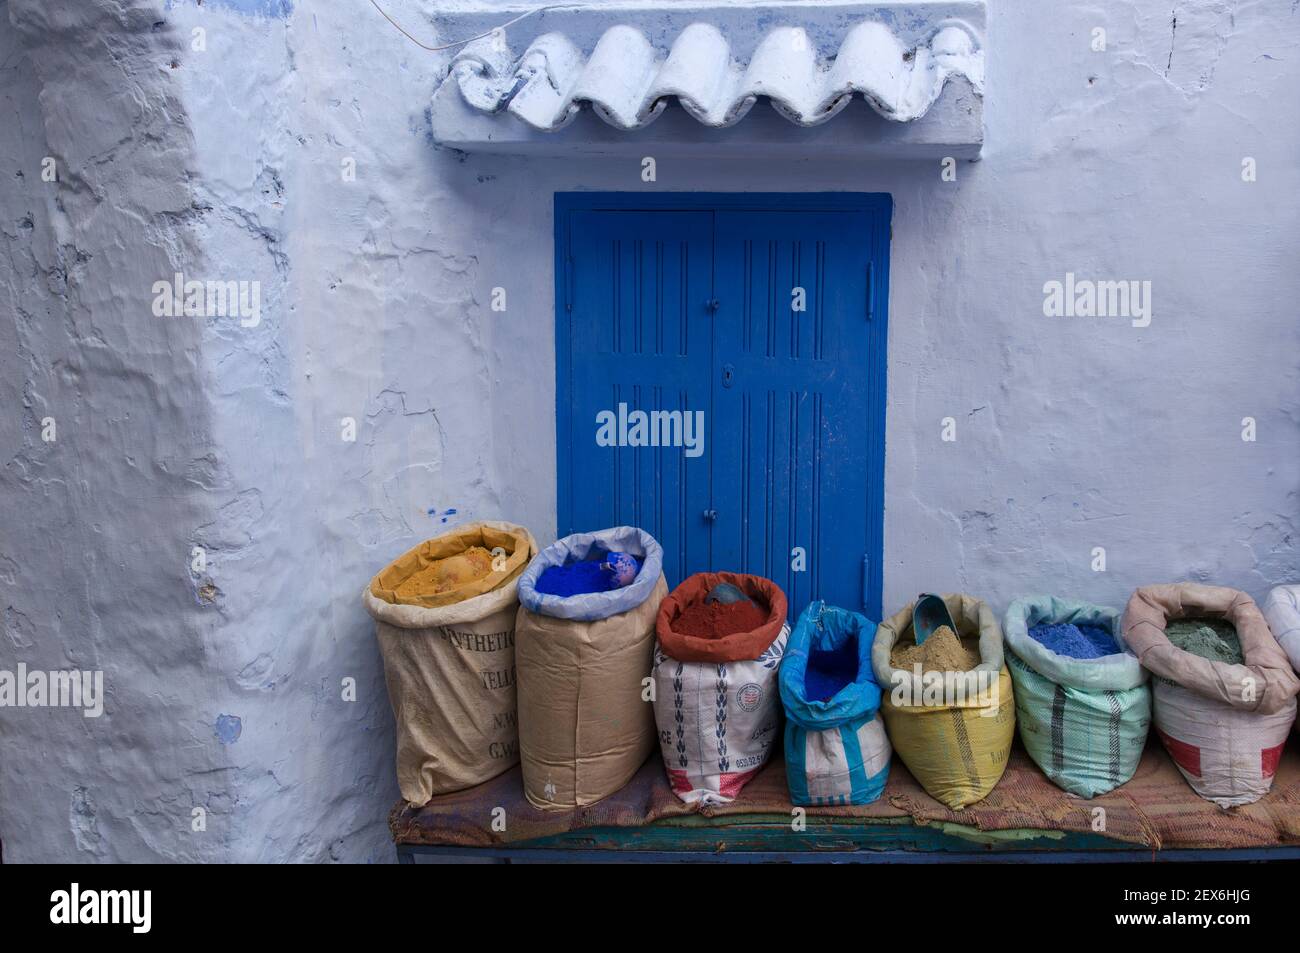 Morocco, Chefchaouen, ' the blue city' architecture of white and indigo lime washed buildings, with bags of coloured paint pigments on sale Stock Photo